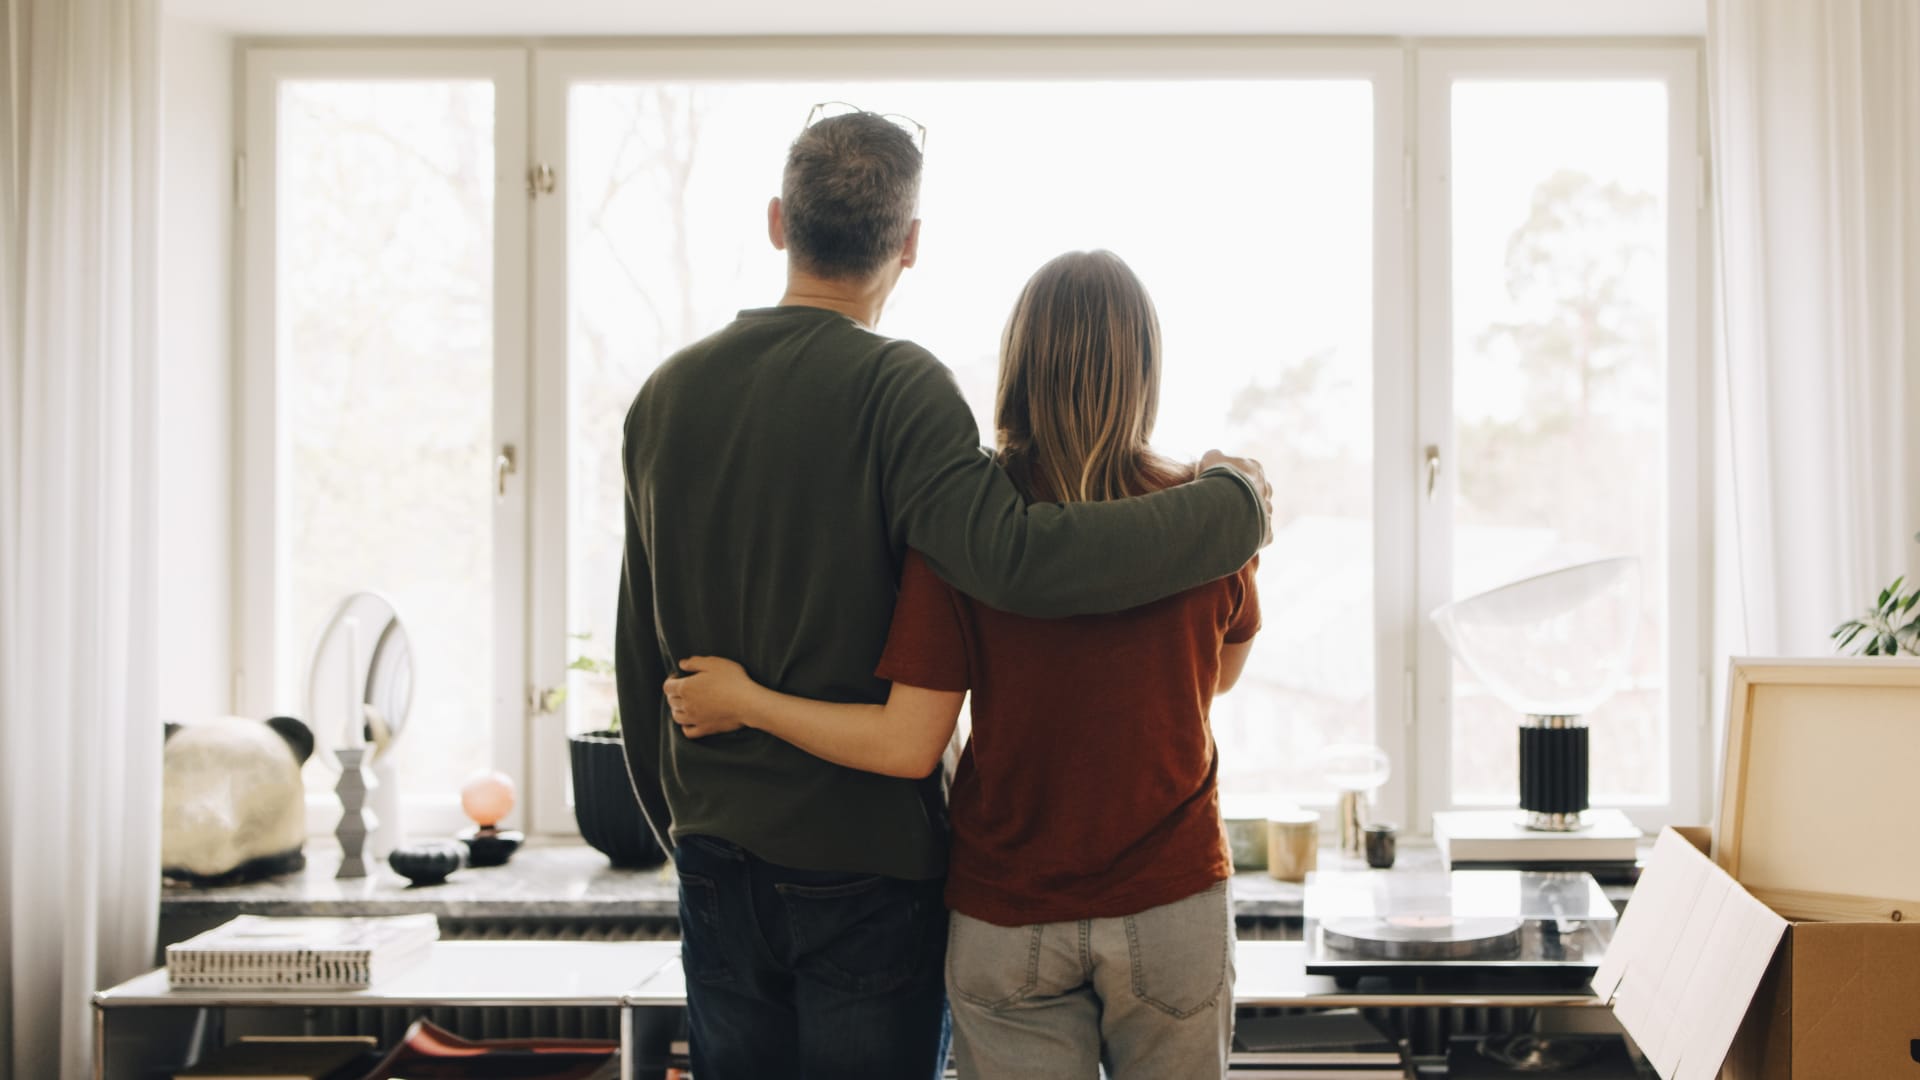 Cohabitating after separating? The arrangement is not uncommon, says marriage therapist: Here’s why it can be successful